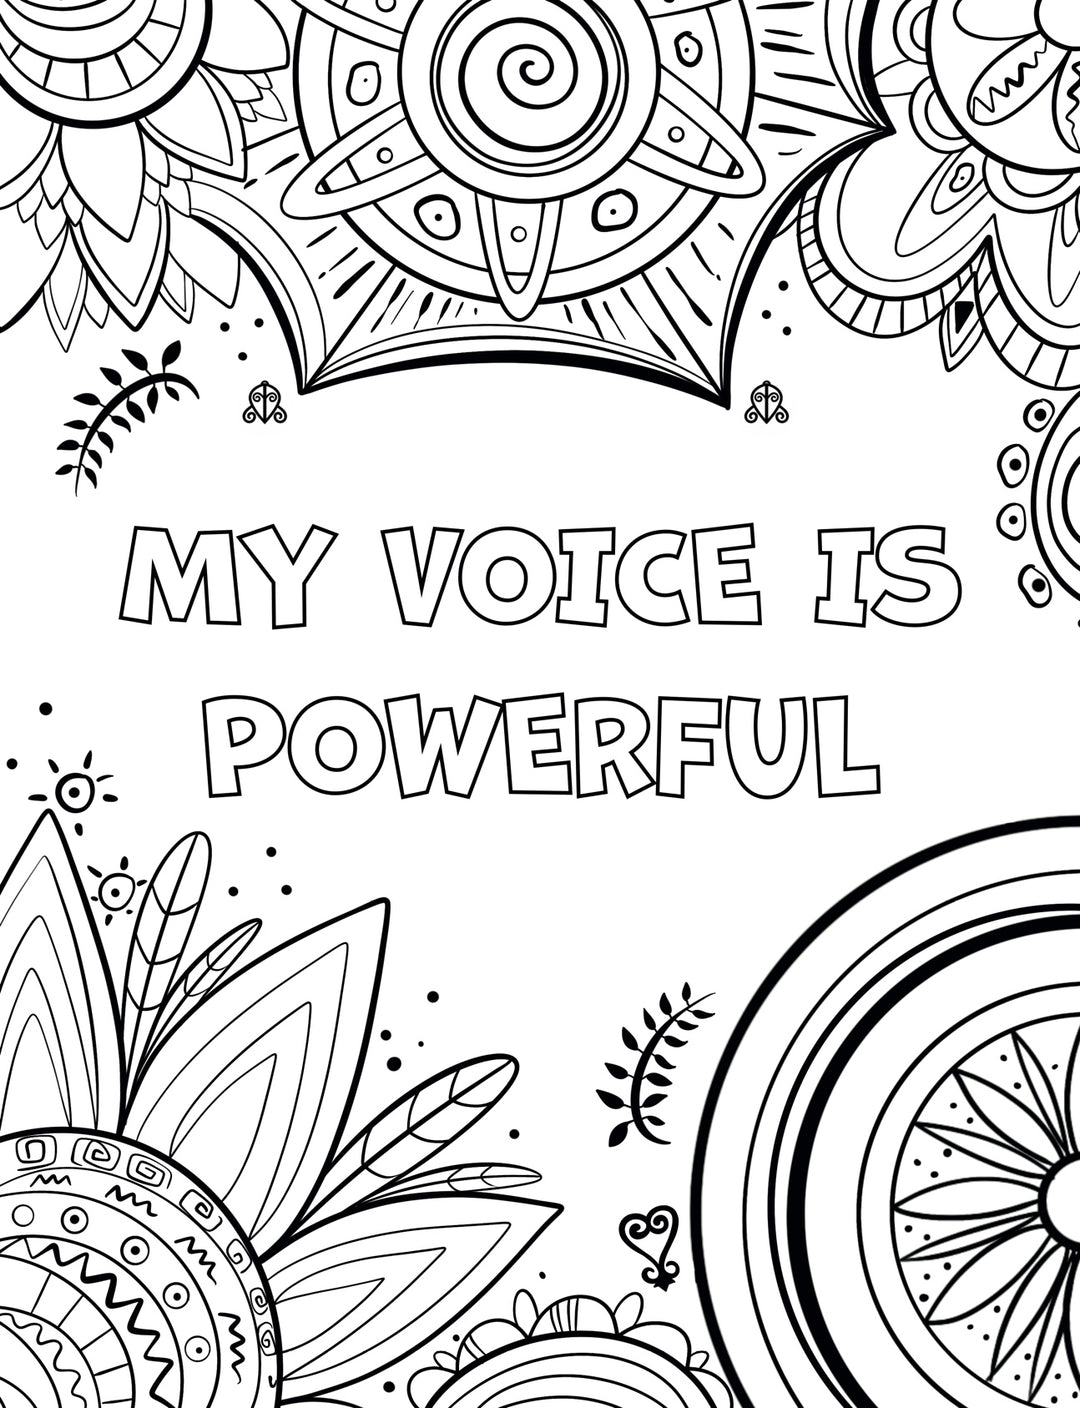 Affirmations Coloring Sheet- My Voice is Powerful